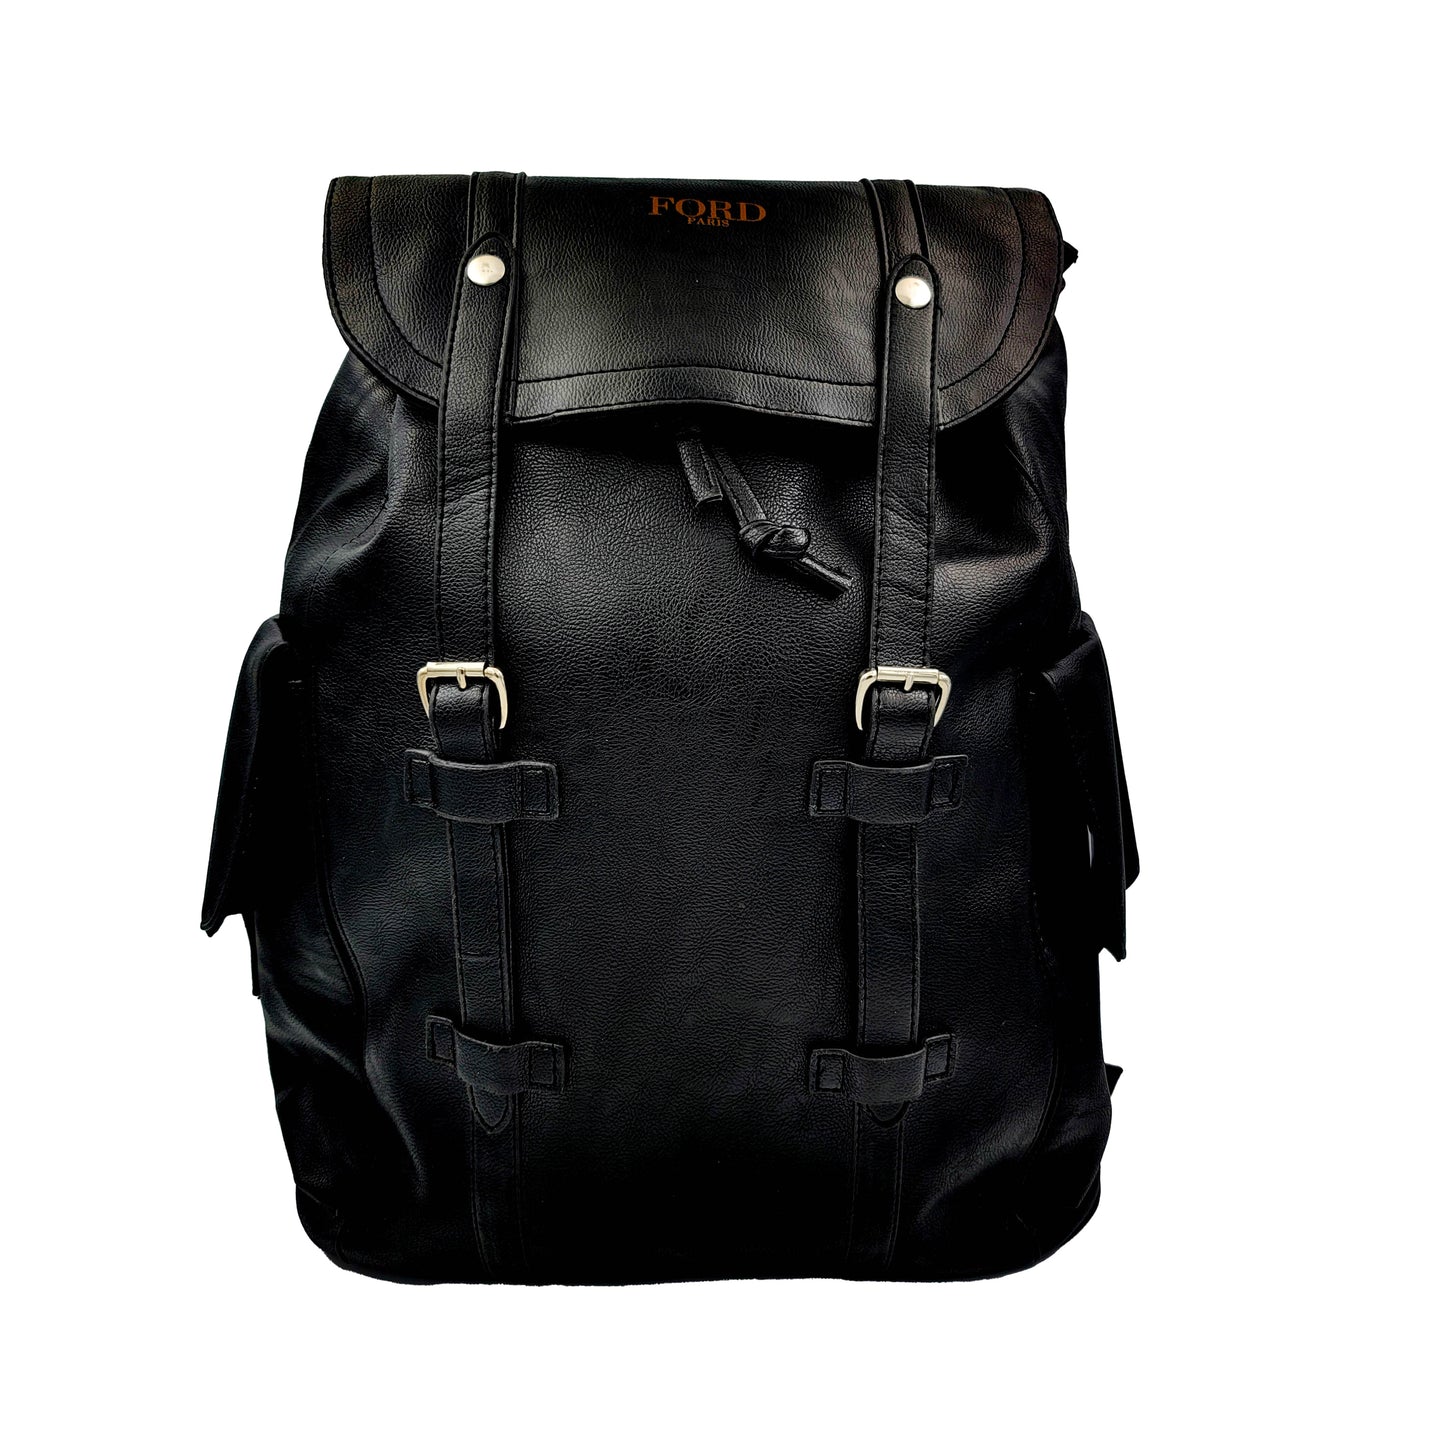 FORD PARIS MENS LEATHER BACKPACK